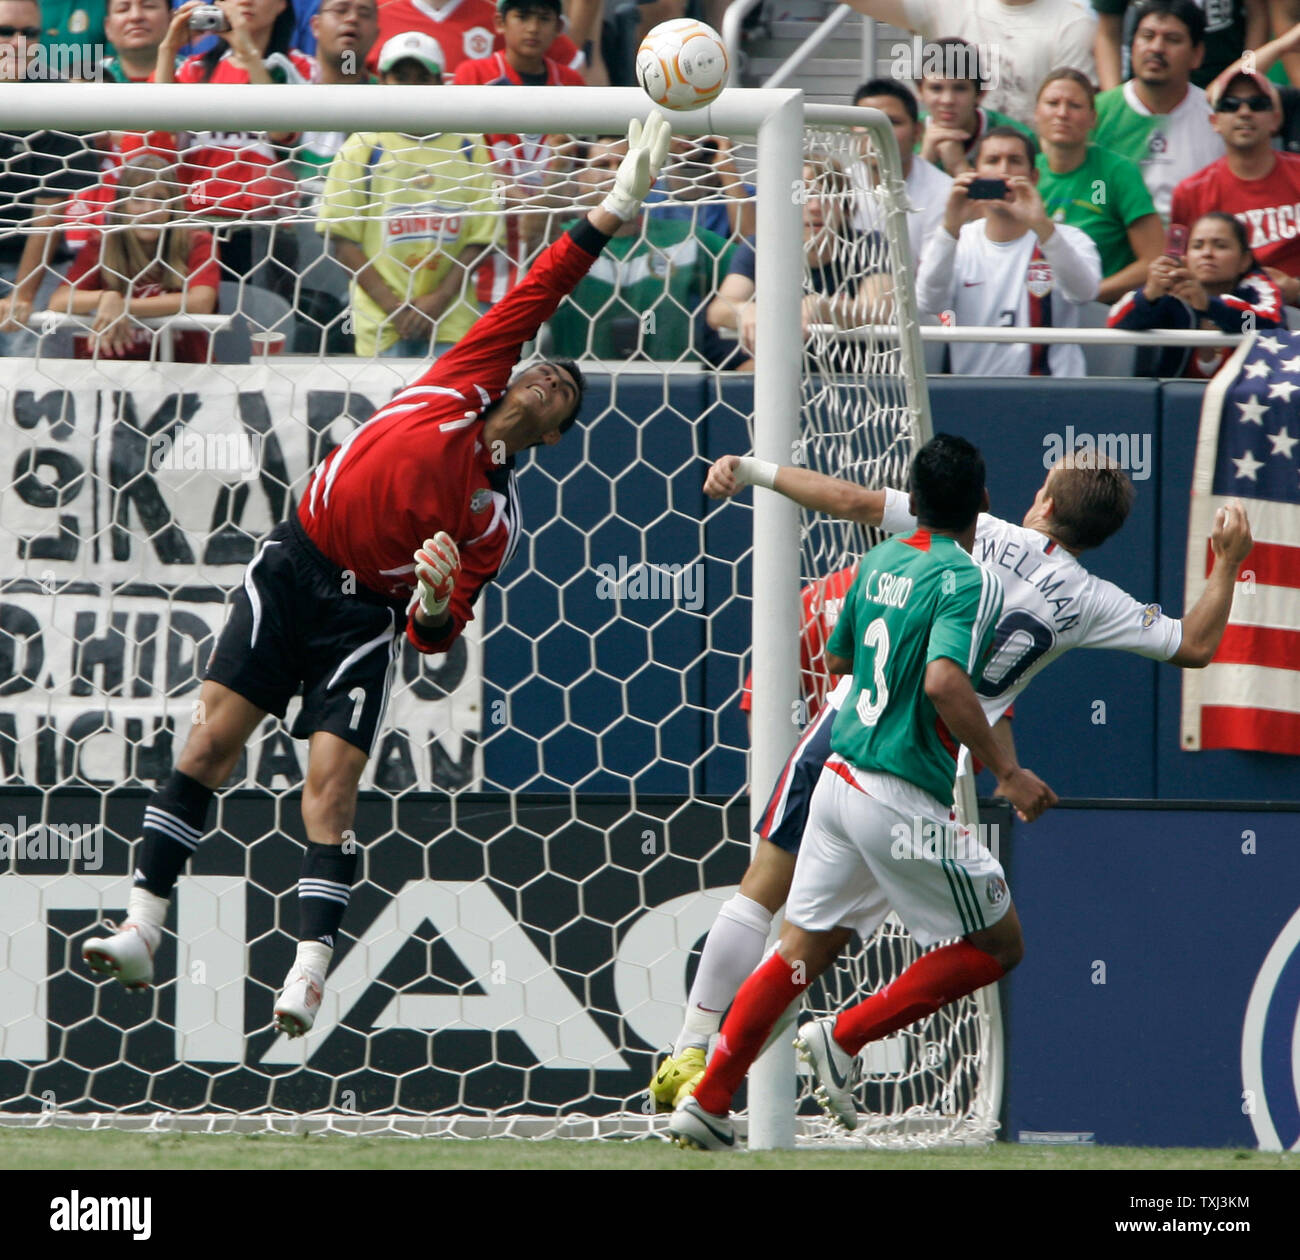 Mexico goalkeeper Oswaldo Sanchez (1) makes a save as Carlos Salcido (3) and United States' Taylor Twellman go for the ball during the second half of the CONCACAF Gold Cup final at Soldier Field in Chicago on June 24, 2007. The United States won 2-1. (UPI Photo/Brian Kersey) Stock Photo